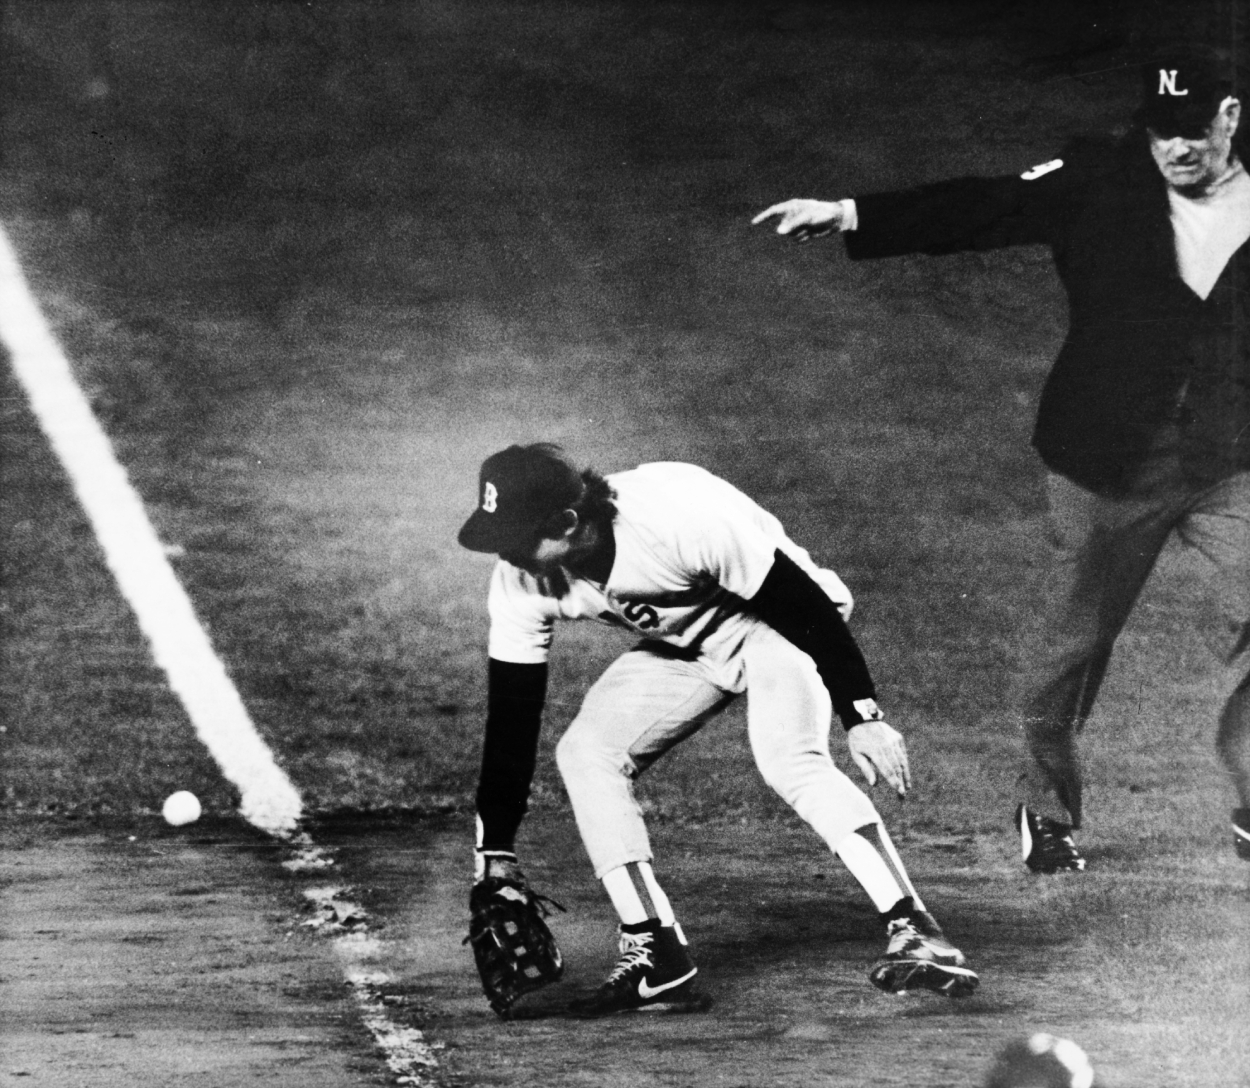 World Series Memories: 35 Years Ago, Bill Buckner Infamously Had a Ball Slip Through His Legs, Giving the Mets New Life Against the Red Sox